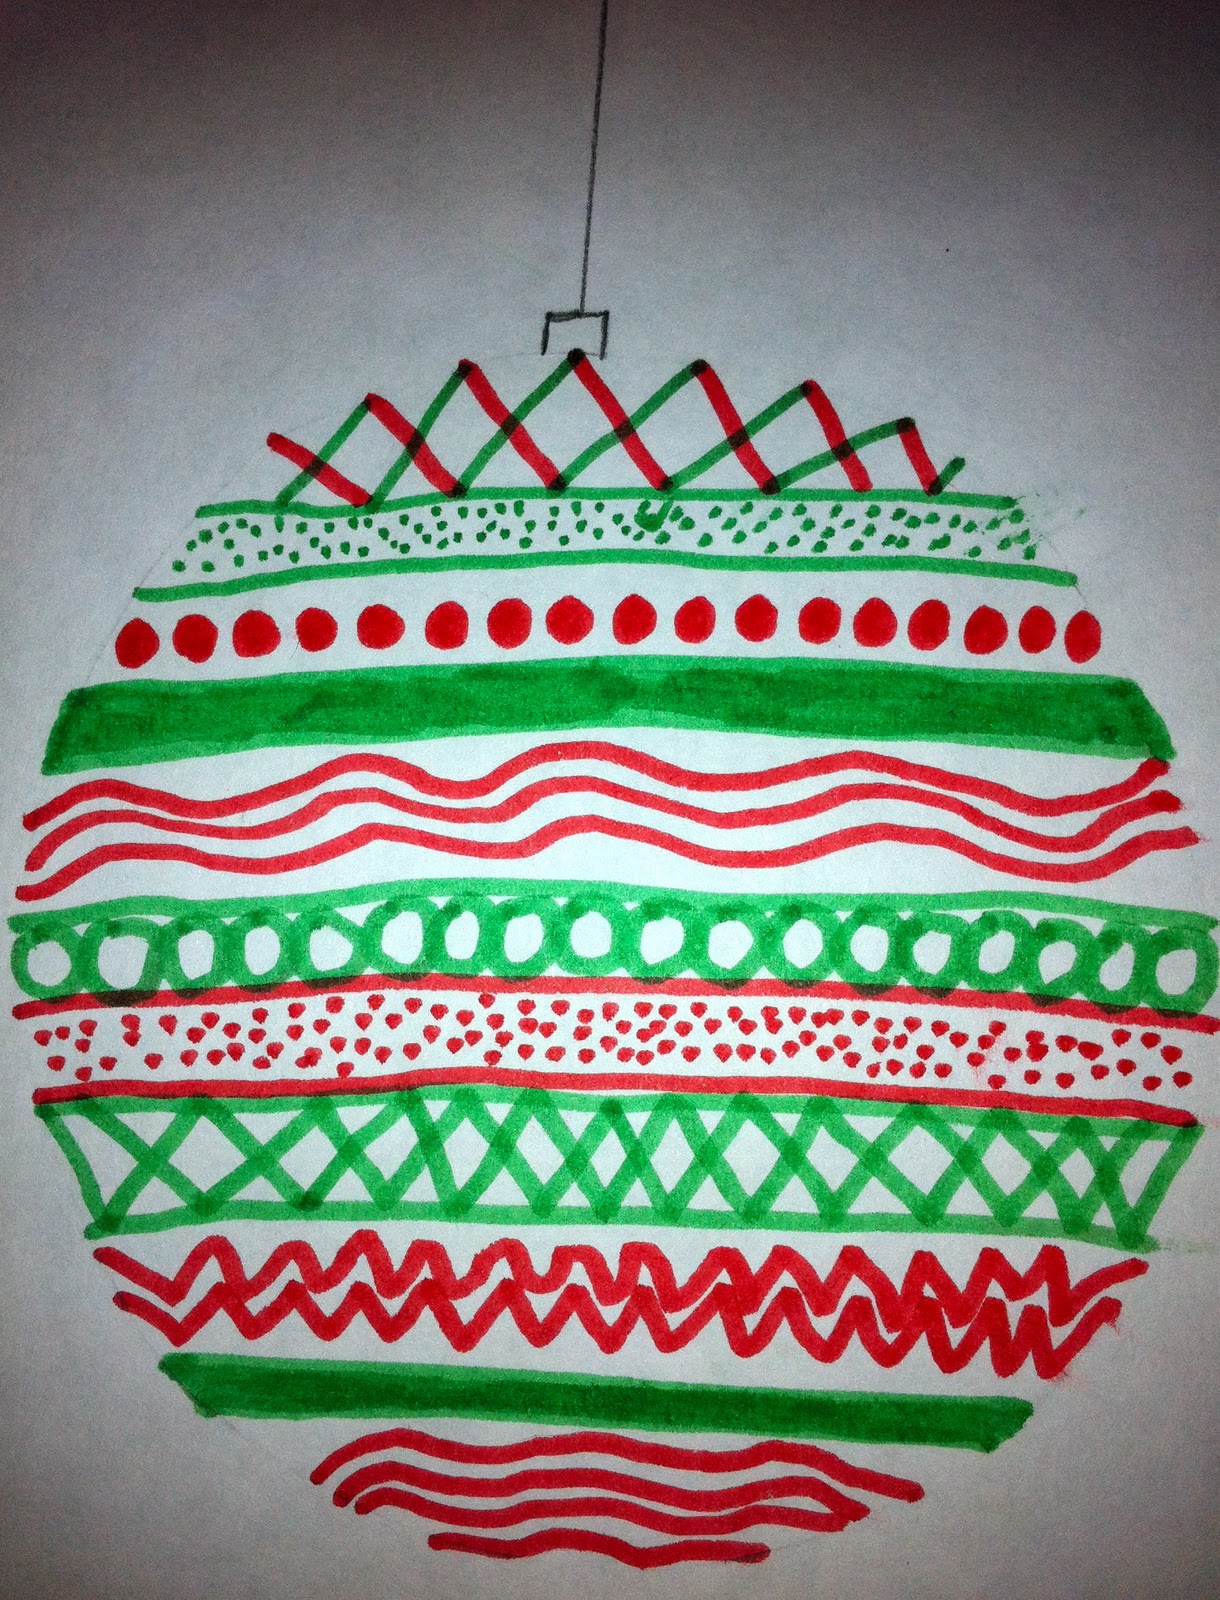 Expression of Imagination: "Line Design Ornaments" by Eighth Grade